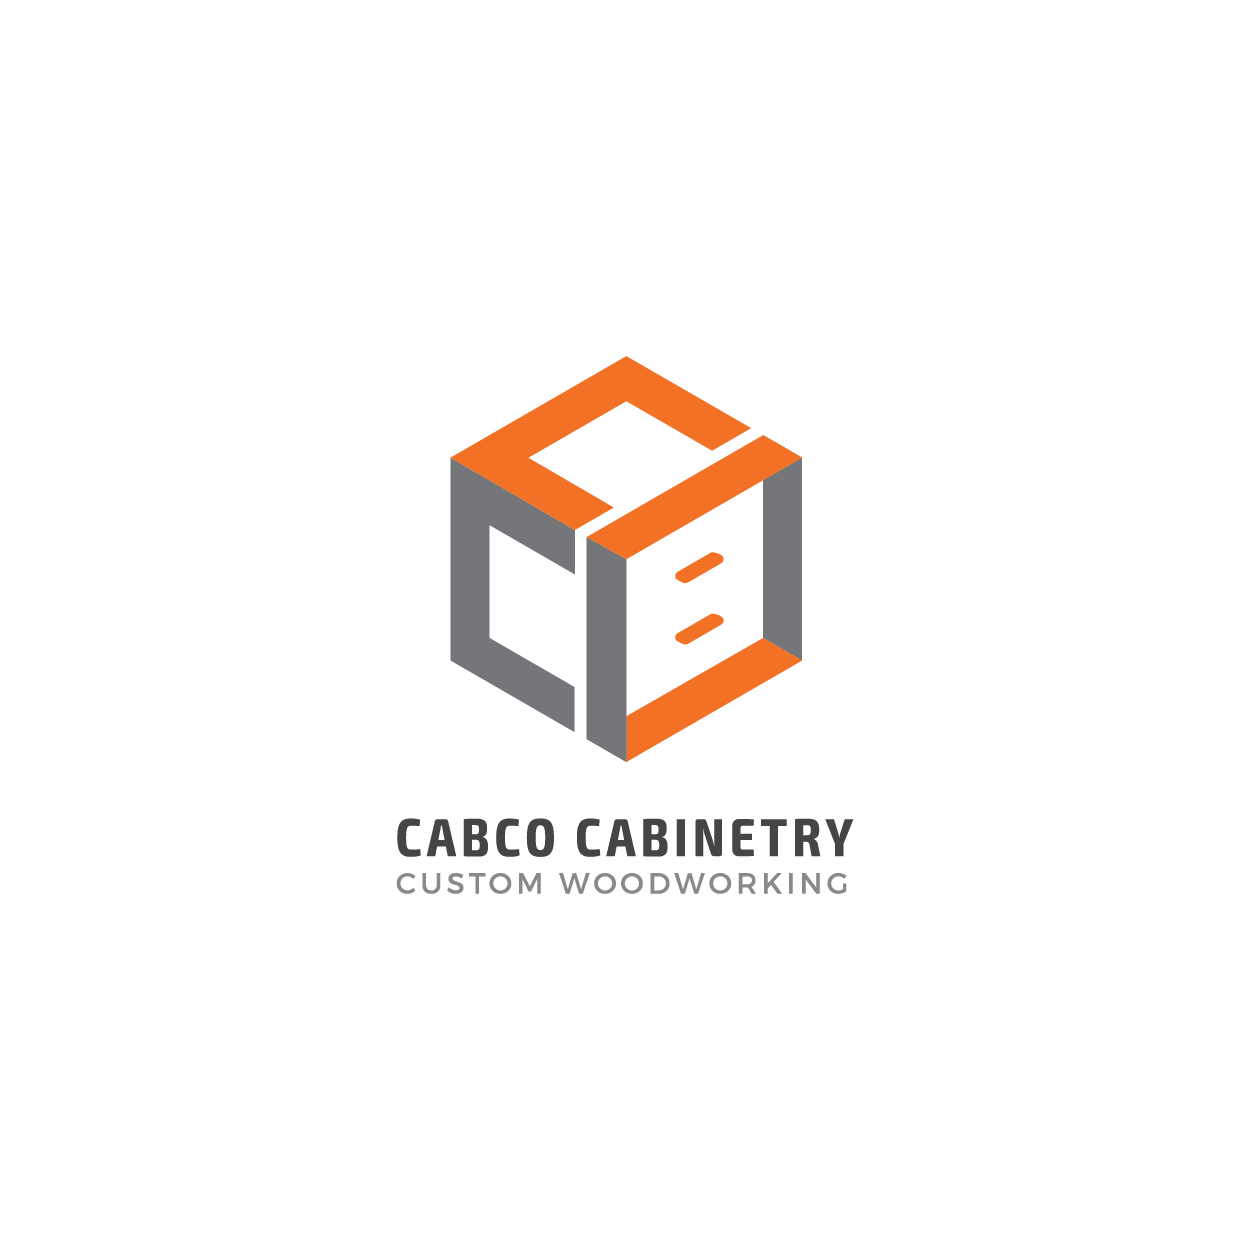 Cabinetry Logo - Bold, Modern, It Company Logo Design for Cabco cabinetry custom ...